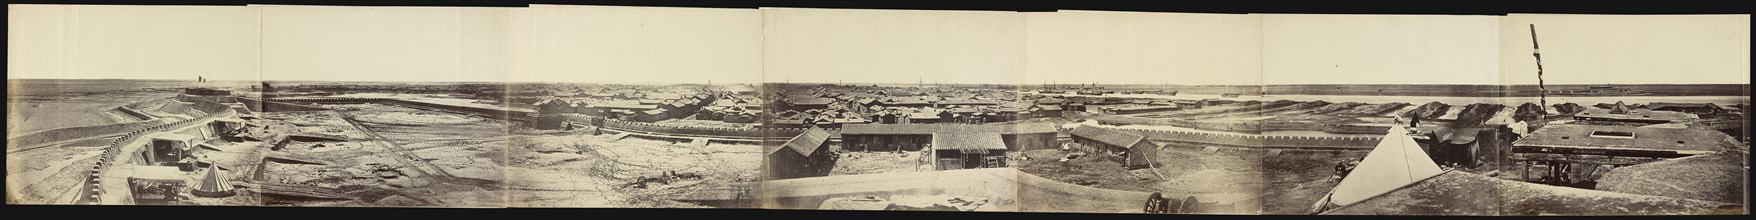 Panorama, View of Pehtung, Binhai New Area, Tianjin, China, August 1st, 1860; Felice Beato, 1832 - 1909, Henry Hering, 1814 - 1893